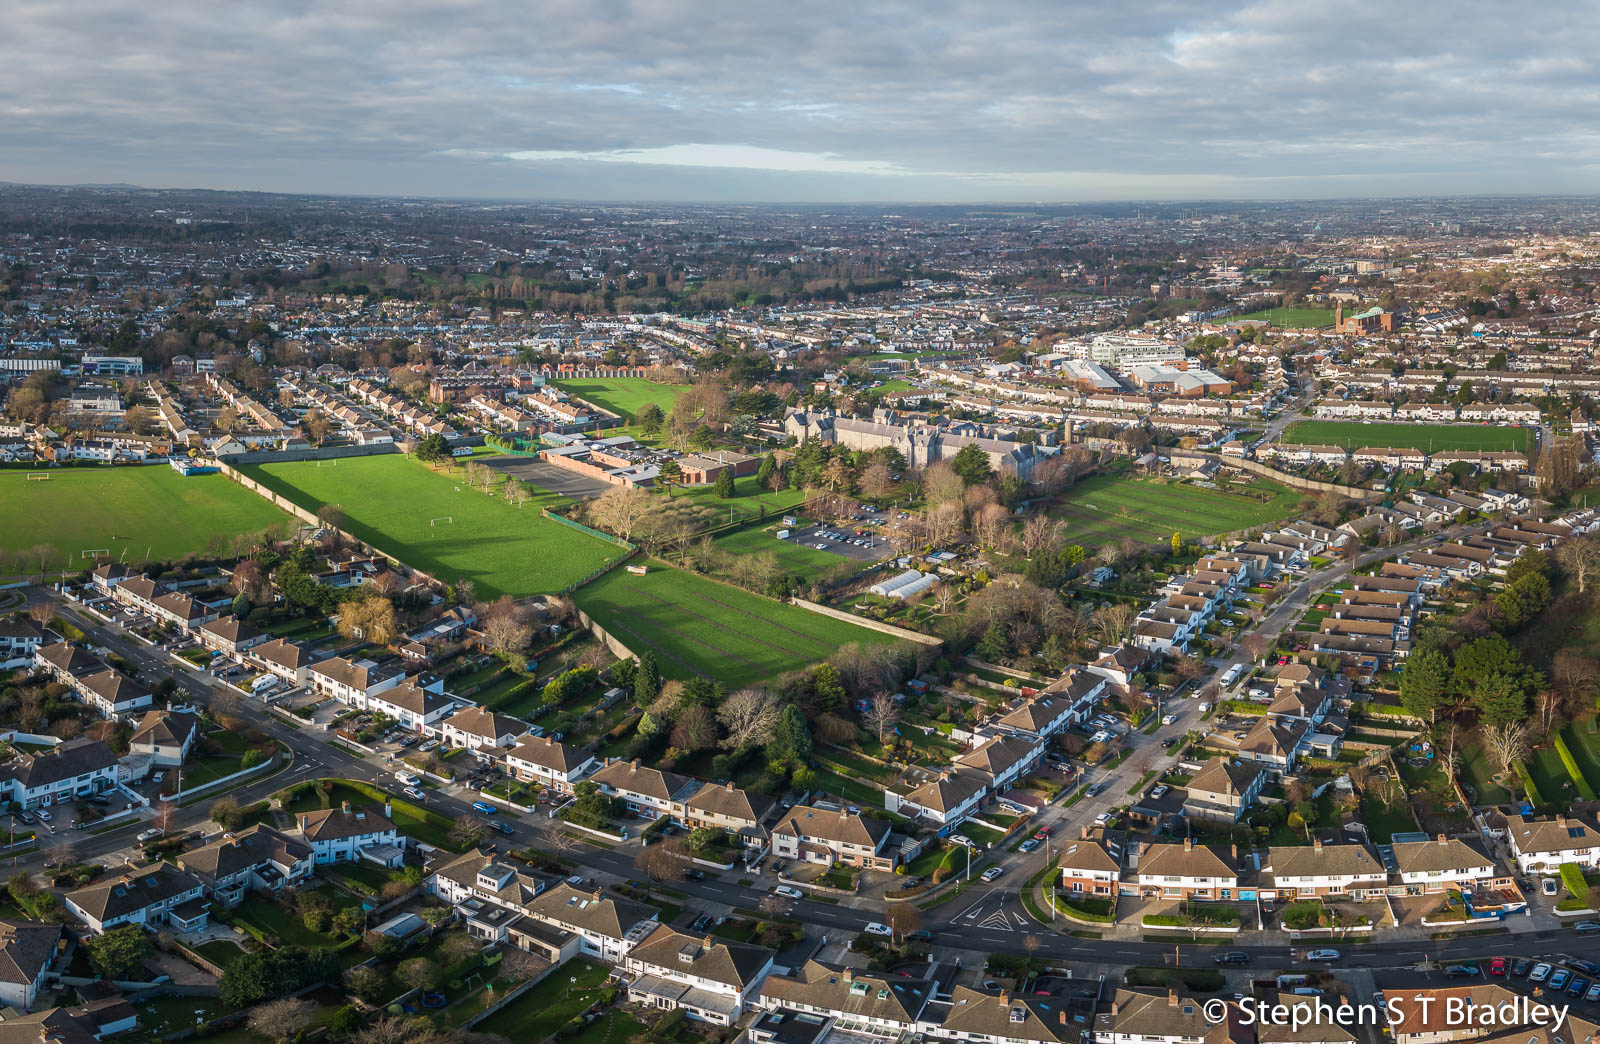 Aerial drone photography and video production services Dublin and Ireland portfolio - commercial aerial photography of the Dundrum suburb of Dublin Ireland. Photo 5